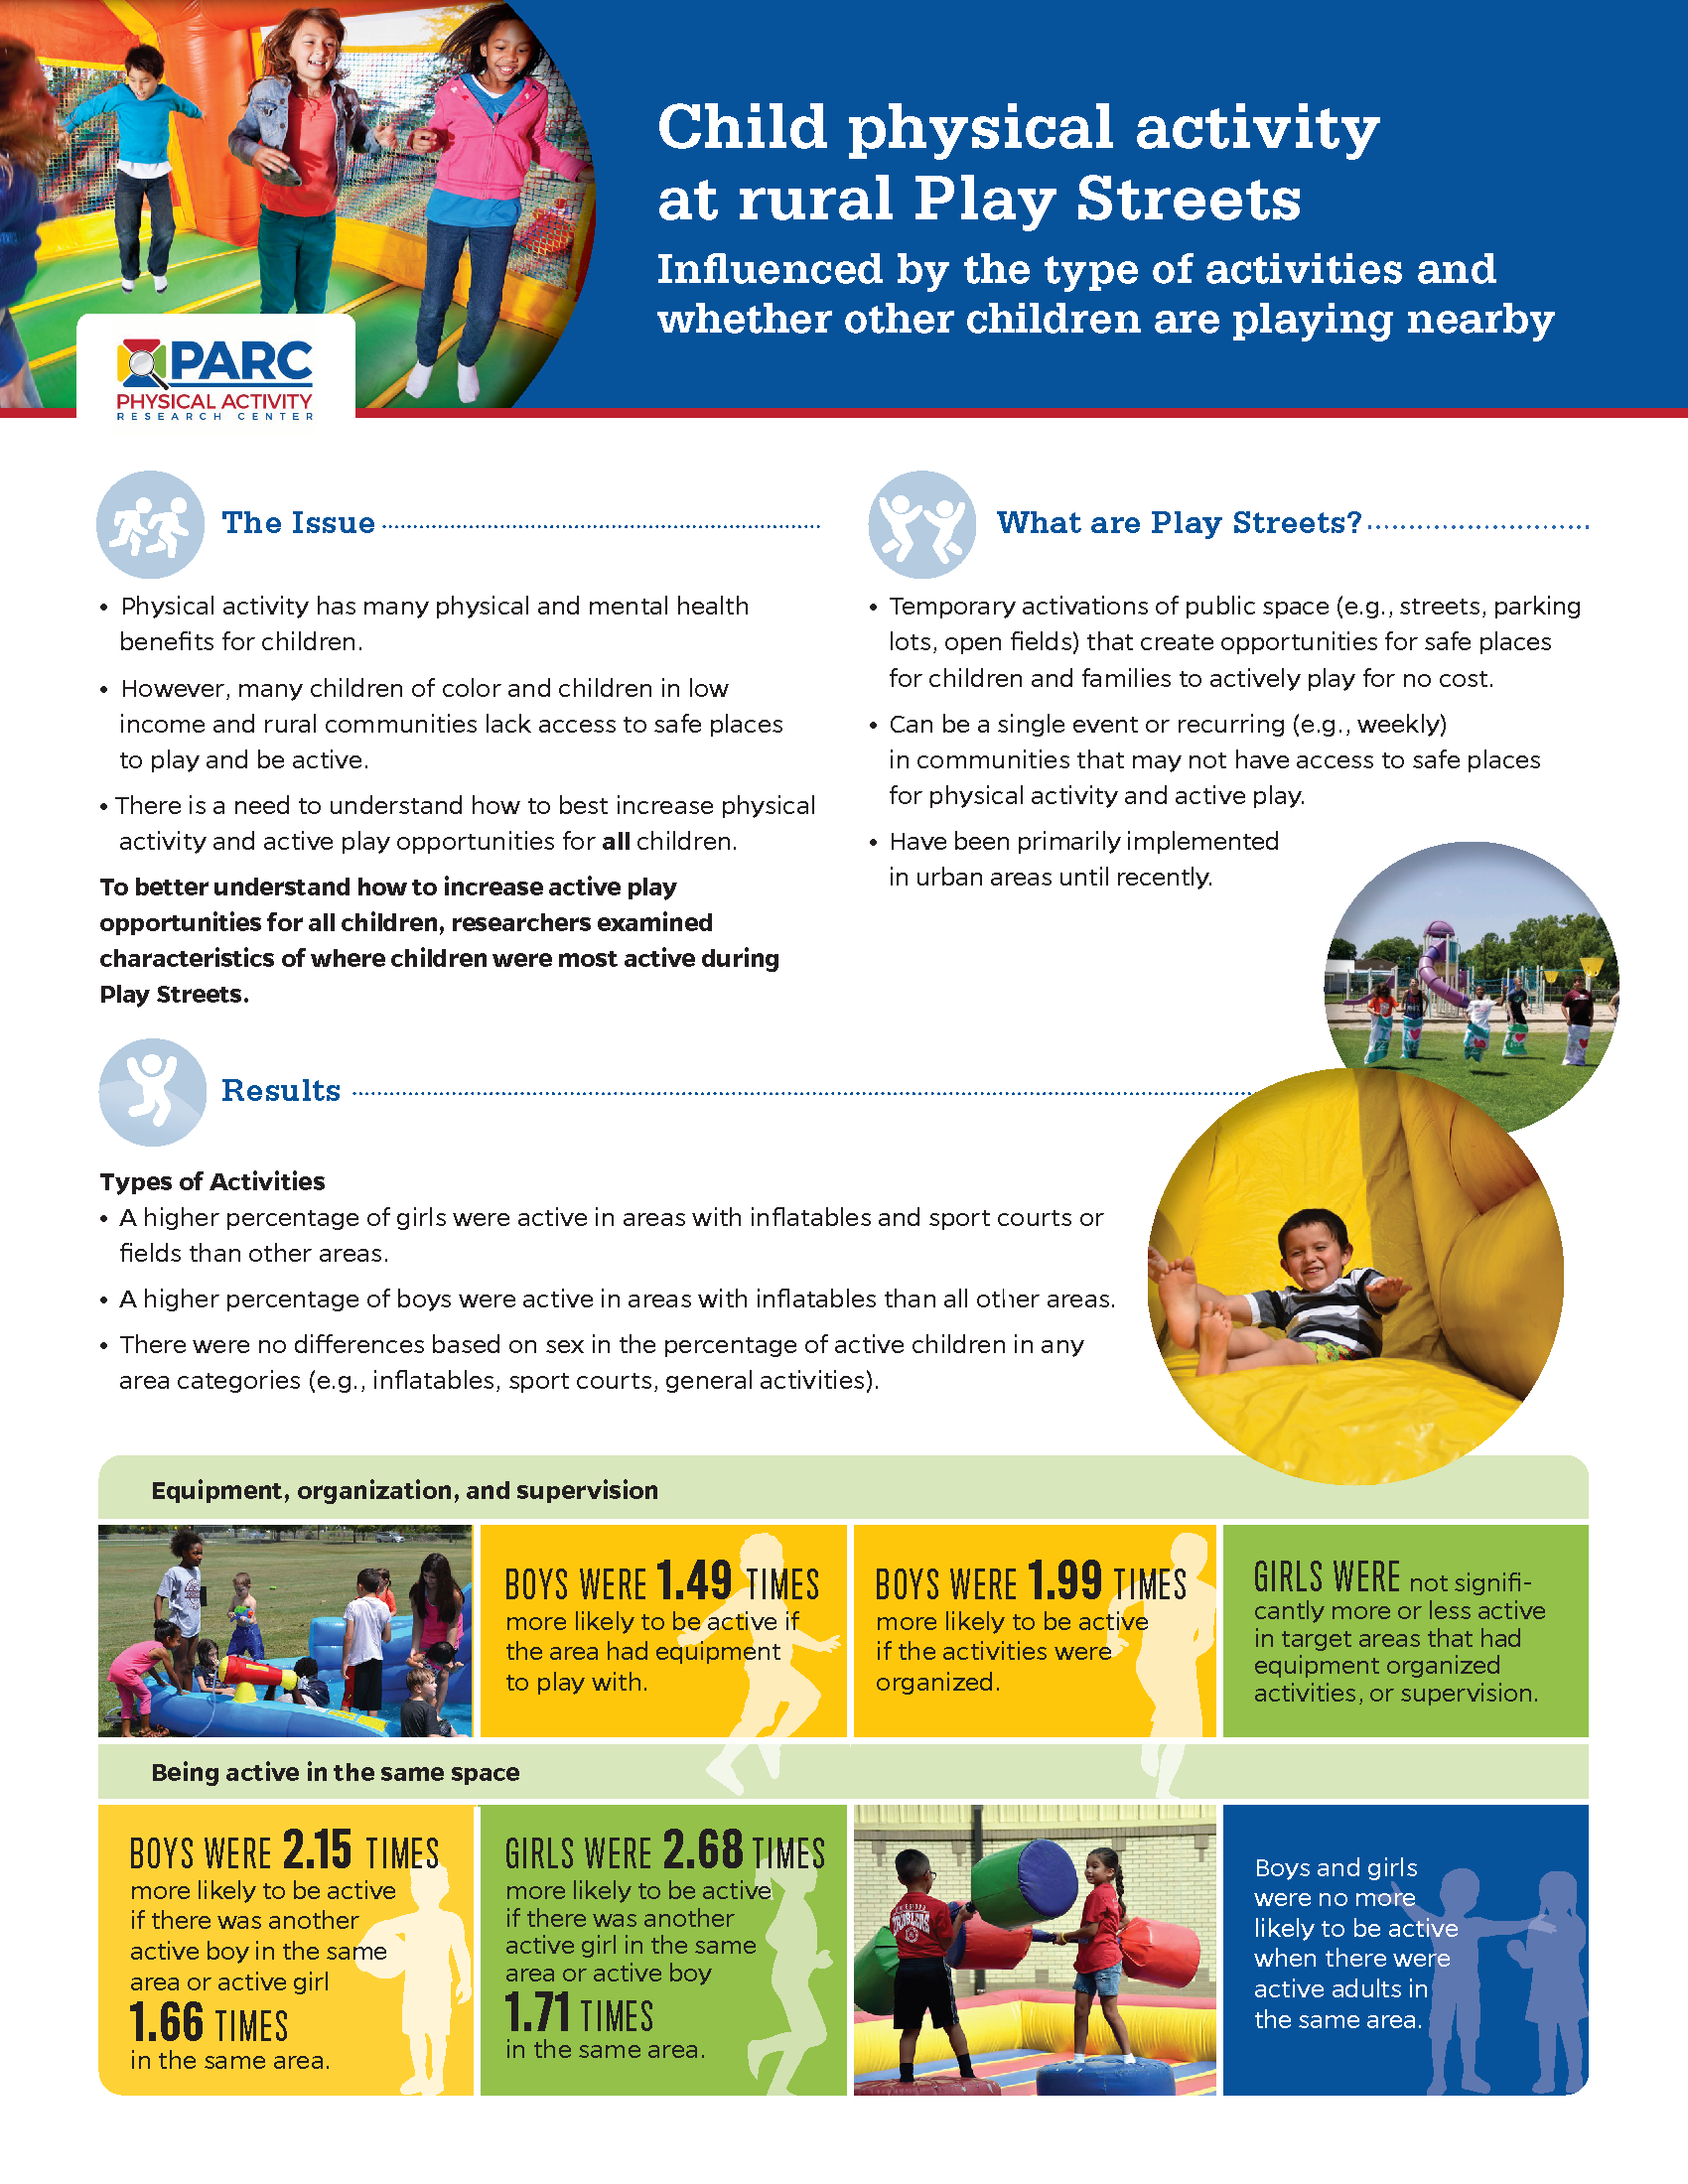 Differences in Child Physical Activity Levels